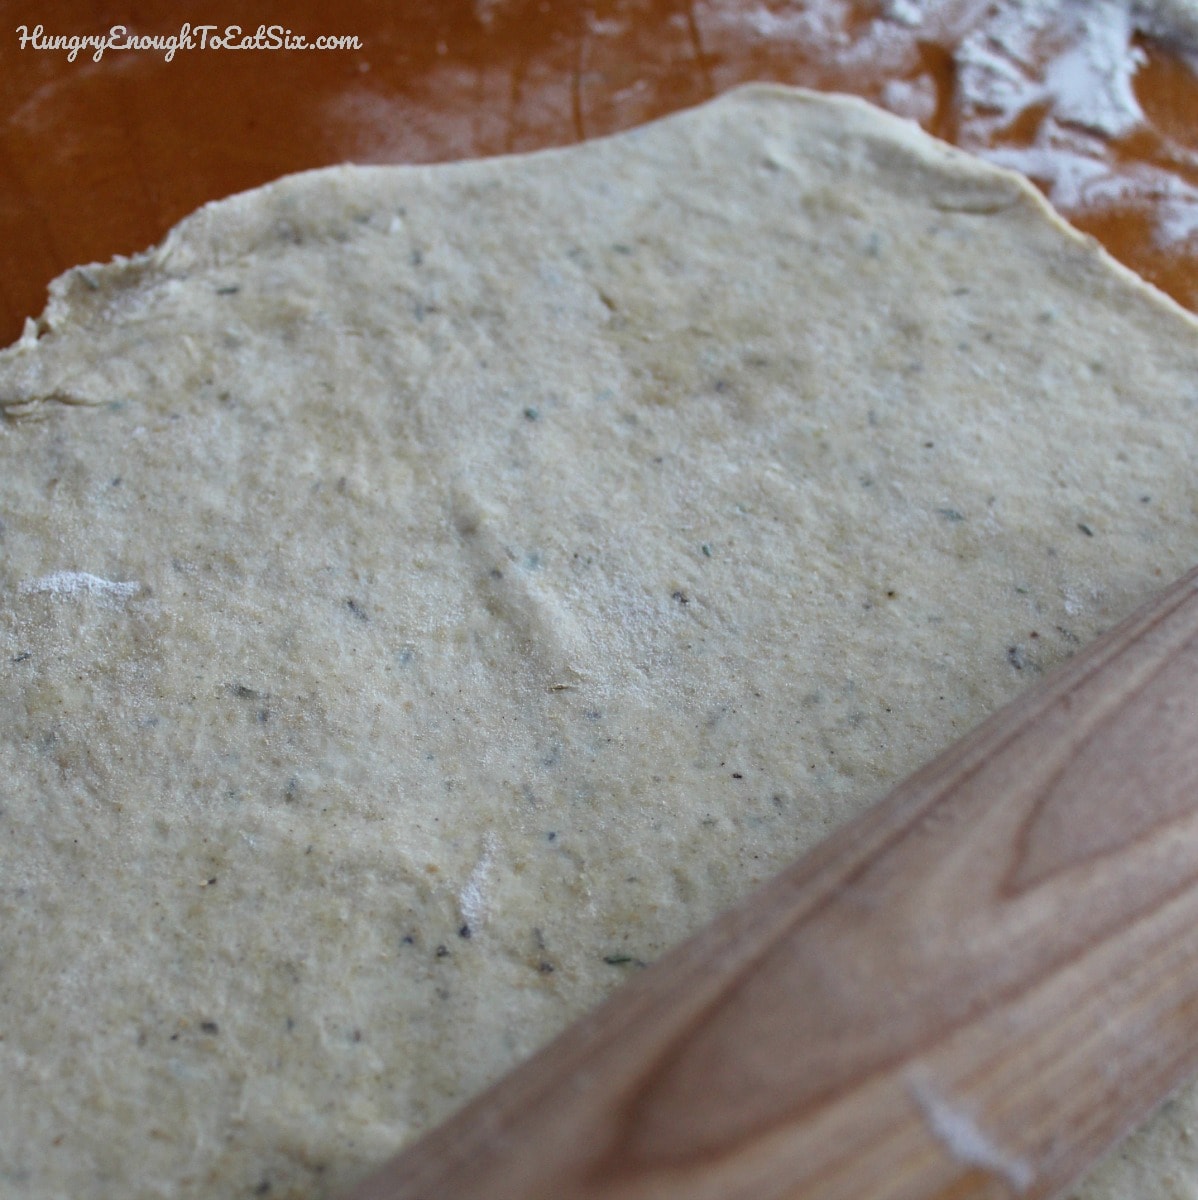 Rolled out pie crust dough